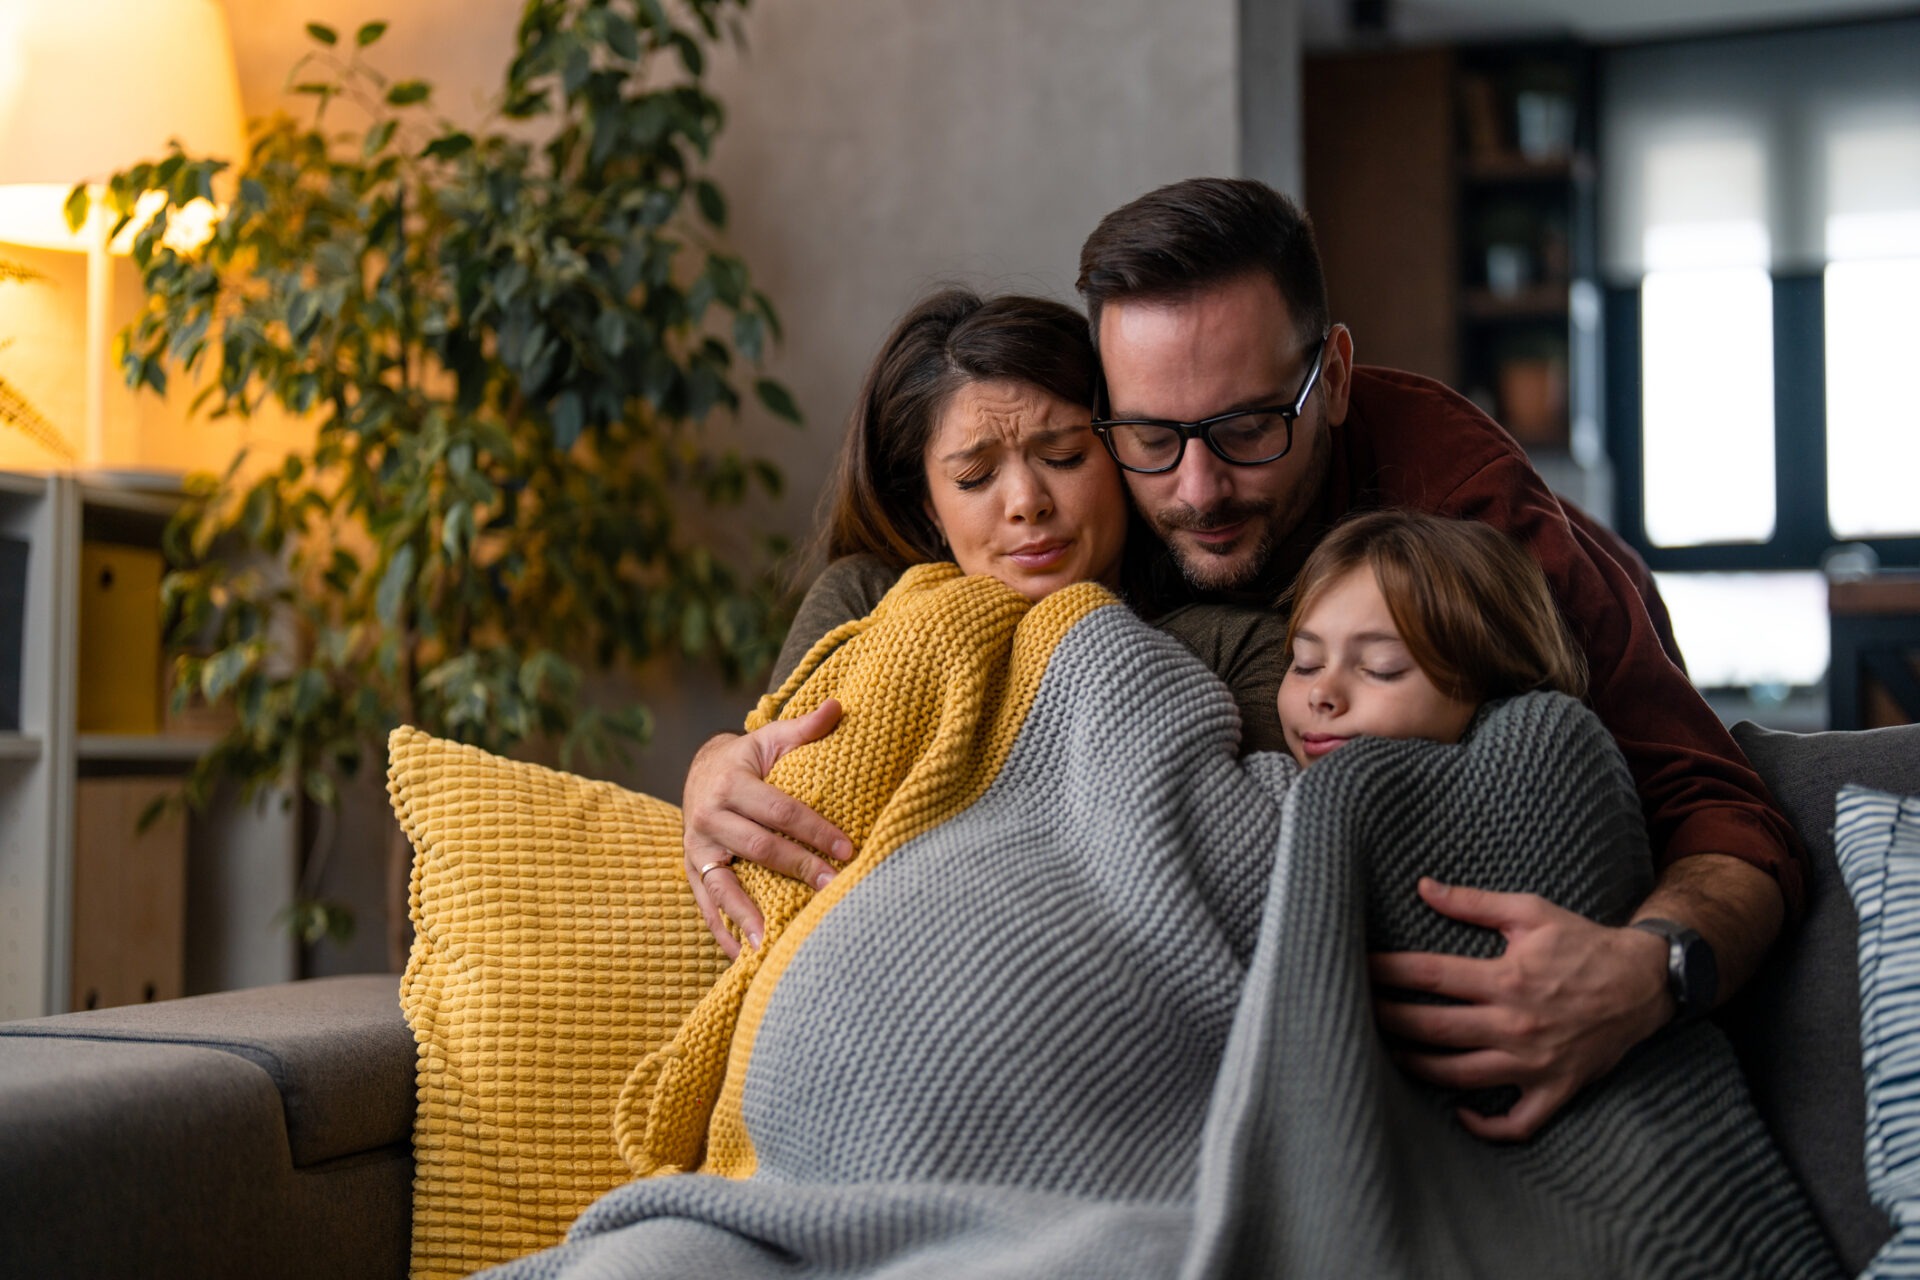 A person and two children are hugging on a couch, wrapped in blankets, with emotional, possibly sad expressions in a cozy room.